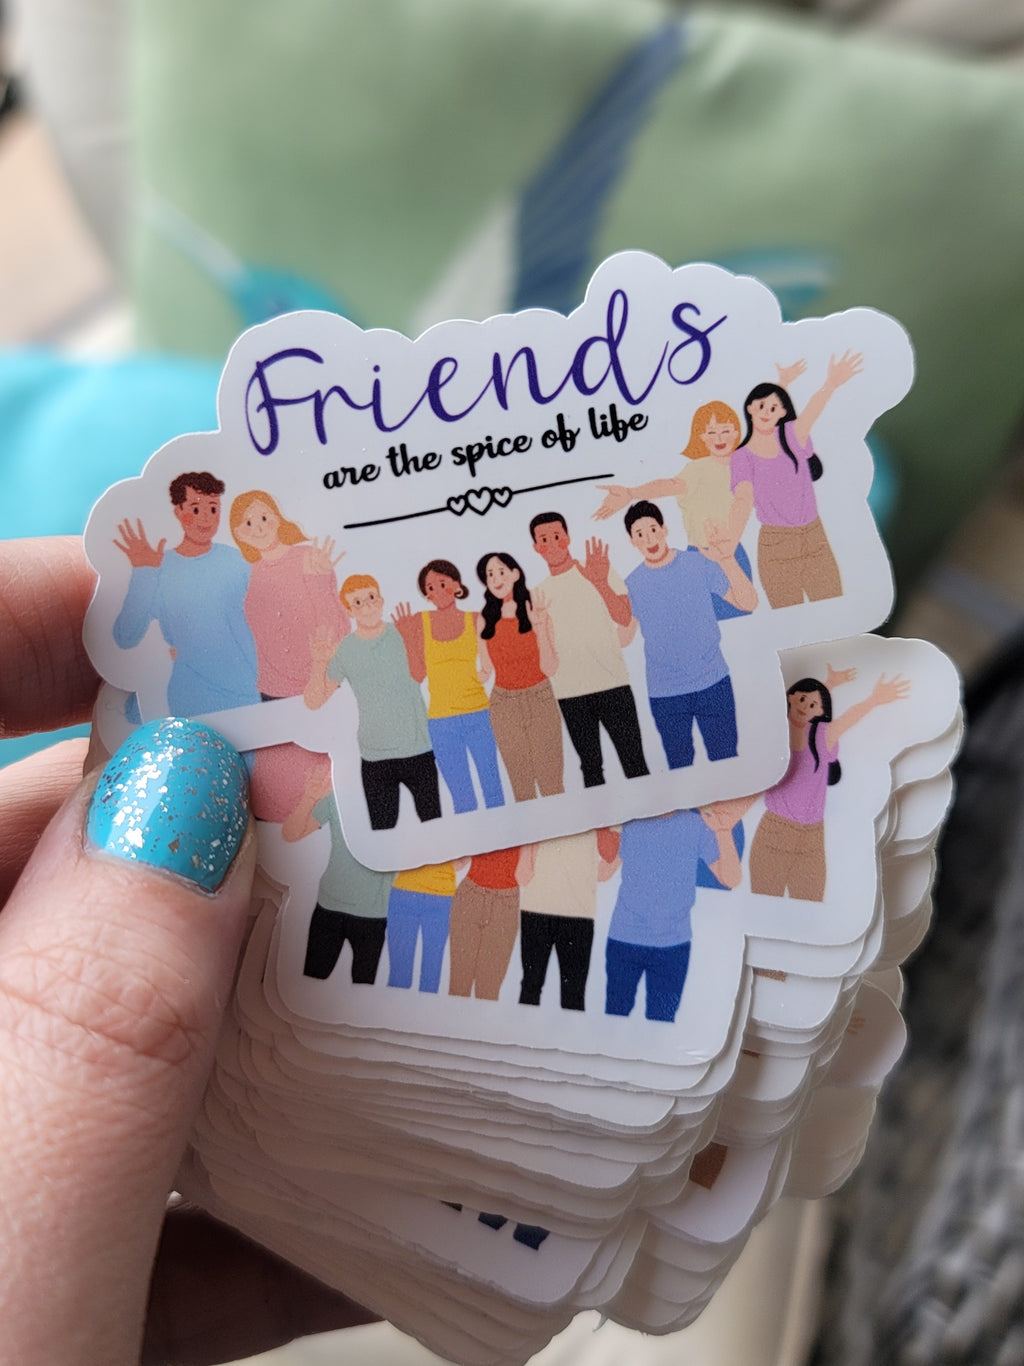 Friends are the spice of life Sticker